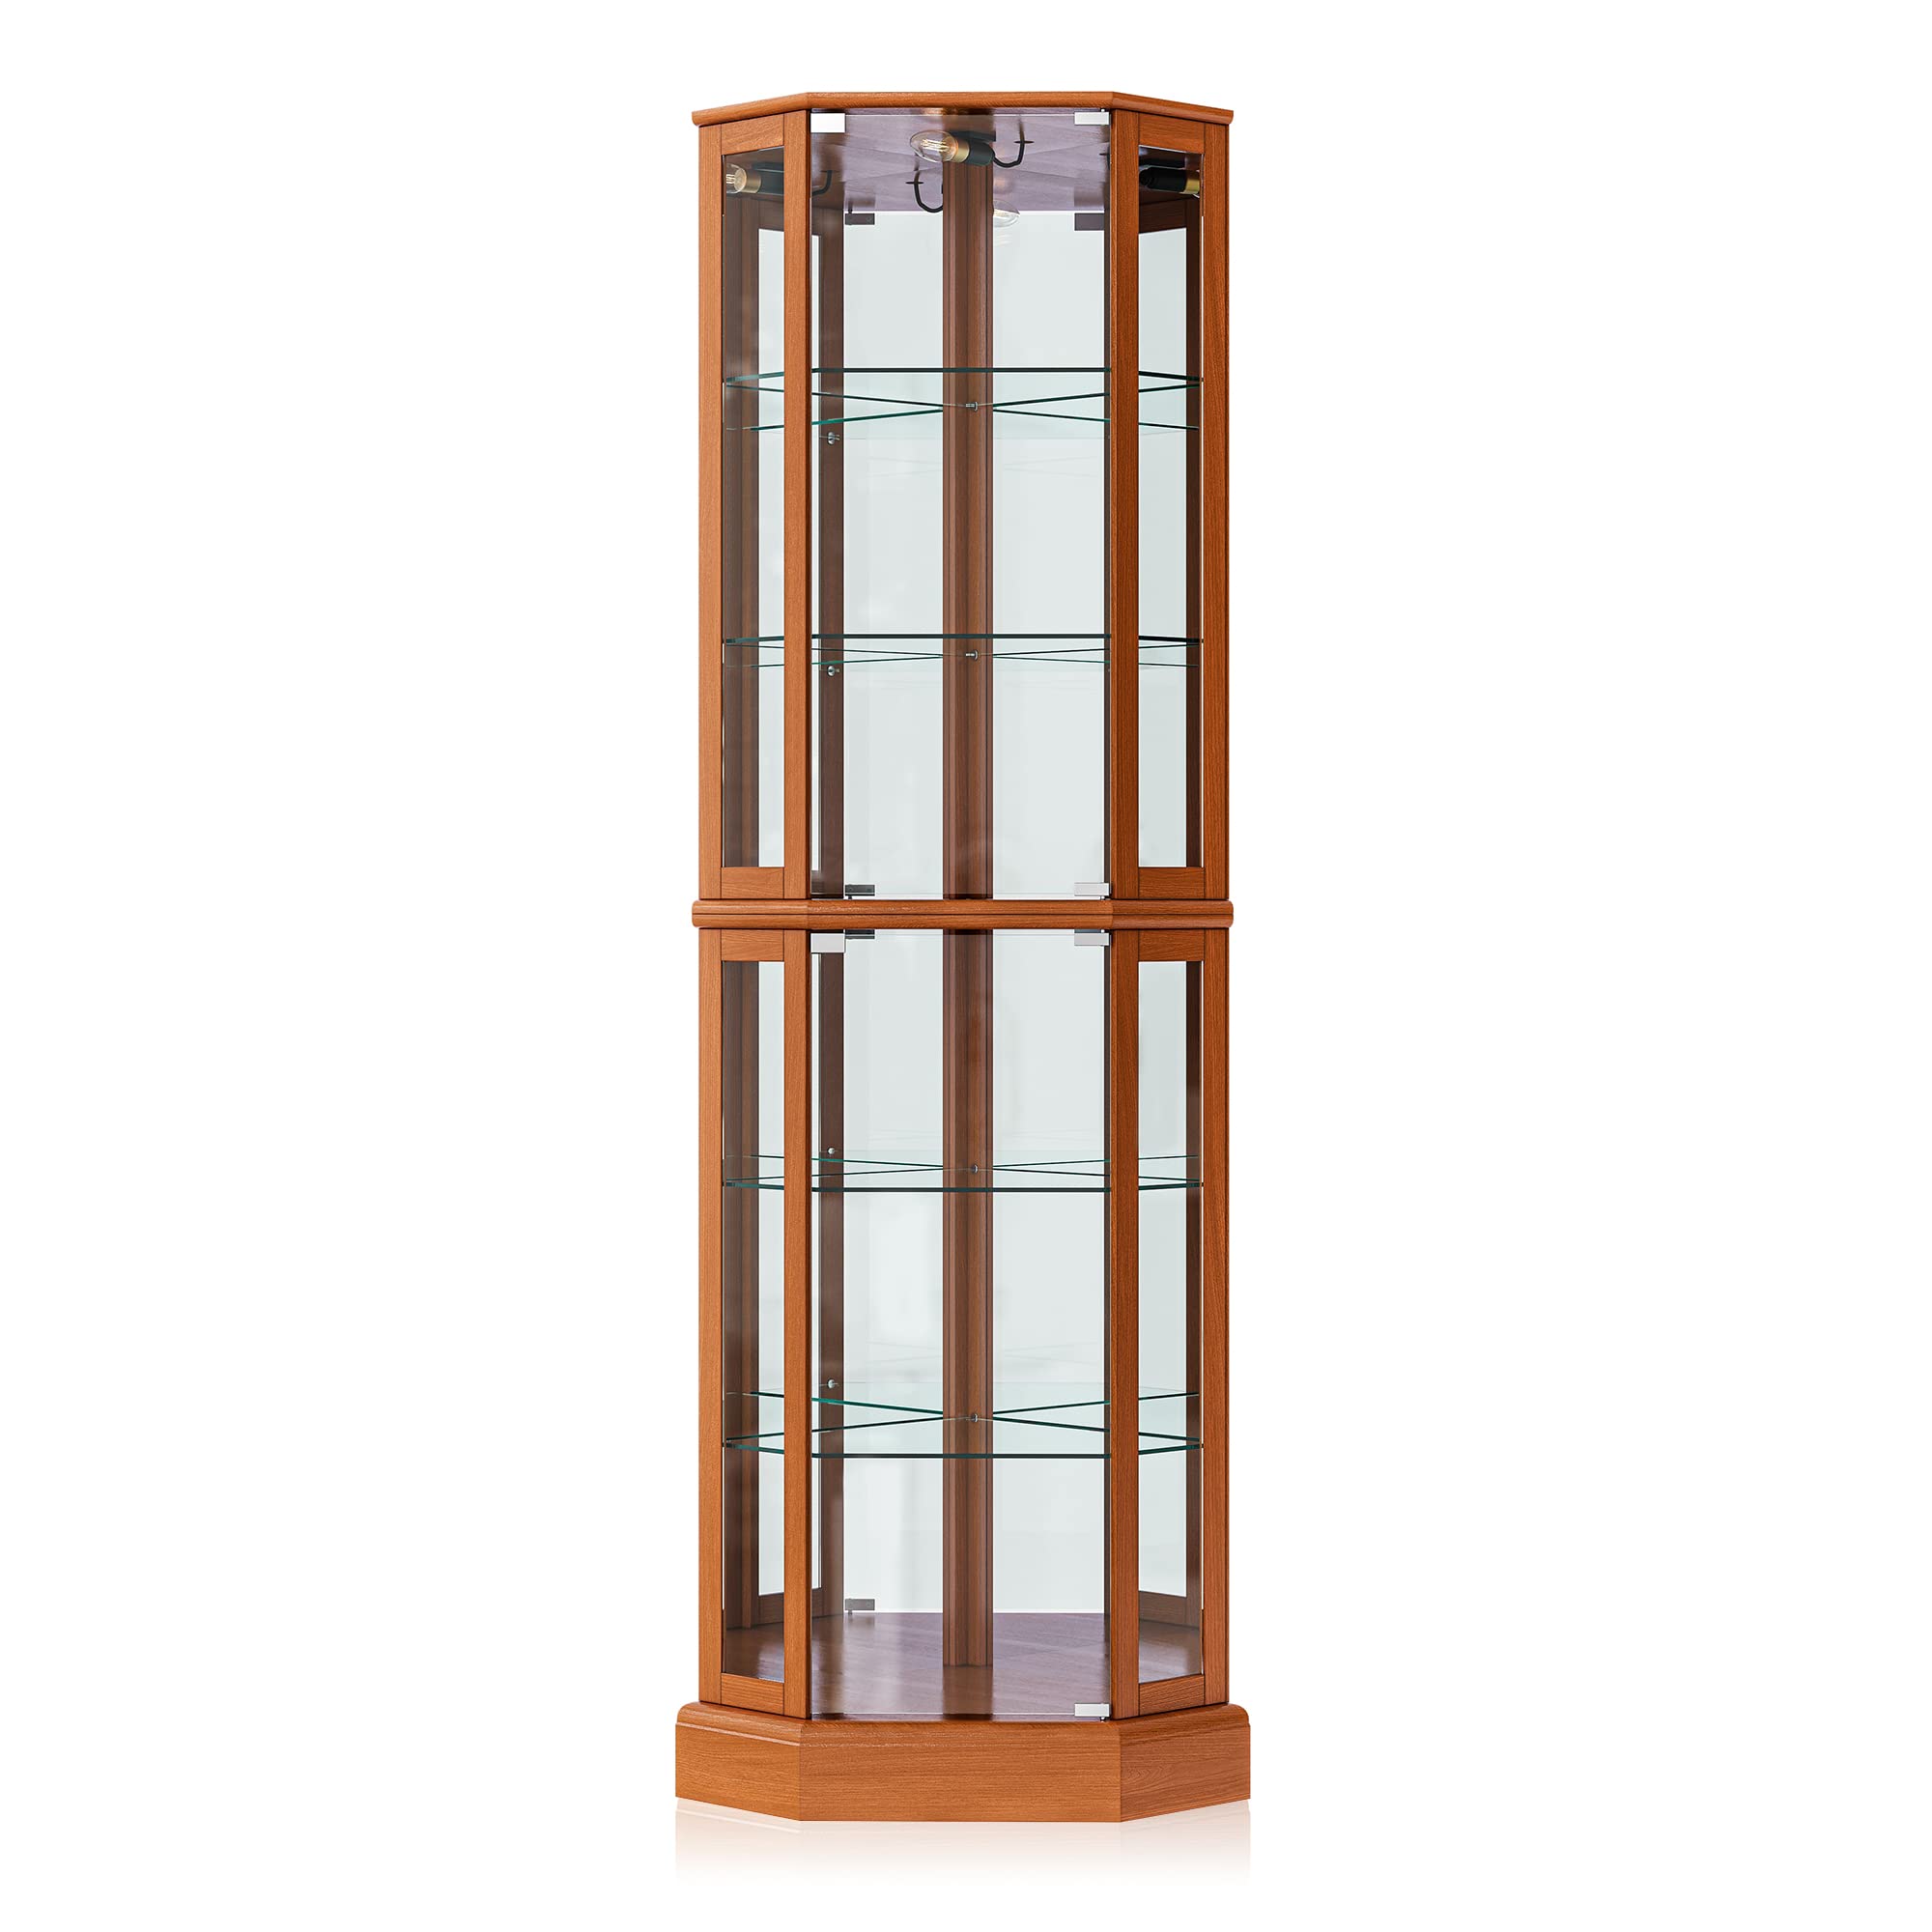 BELLEZE Lighted Curio Cabinet Corner Display Case for Living Room, China Hutch with Tempered Glass Doors and Shelves, Wooden Accent Cabinet, Bar and Liquor Storage Area - Ashfield (Oak)